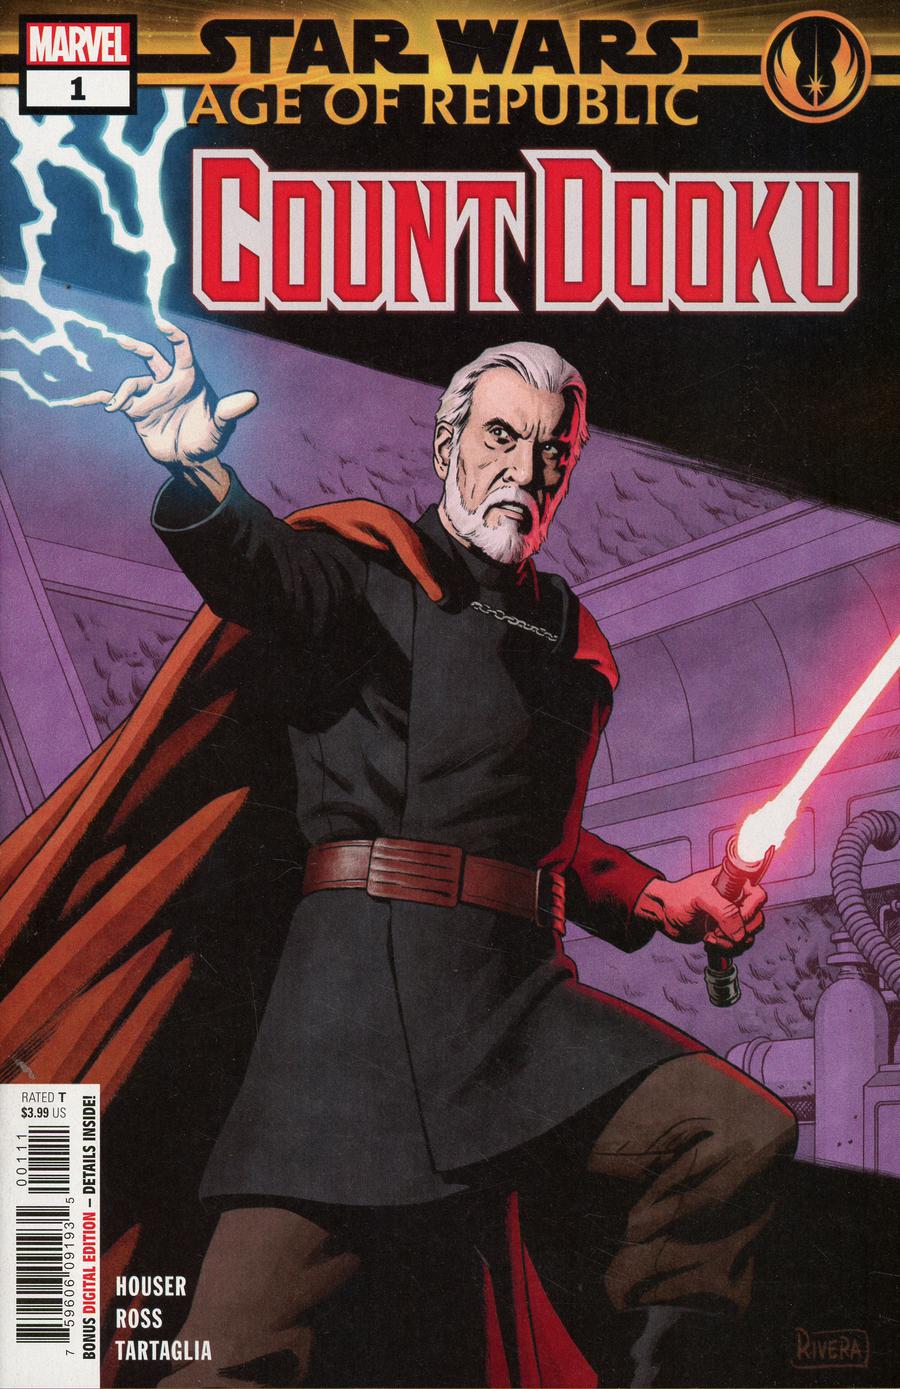 Star Wars Age Of Republic Count Dooku #1 Cover A Regular Paolo Rivera Cover